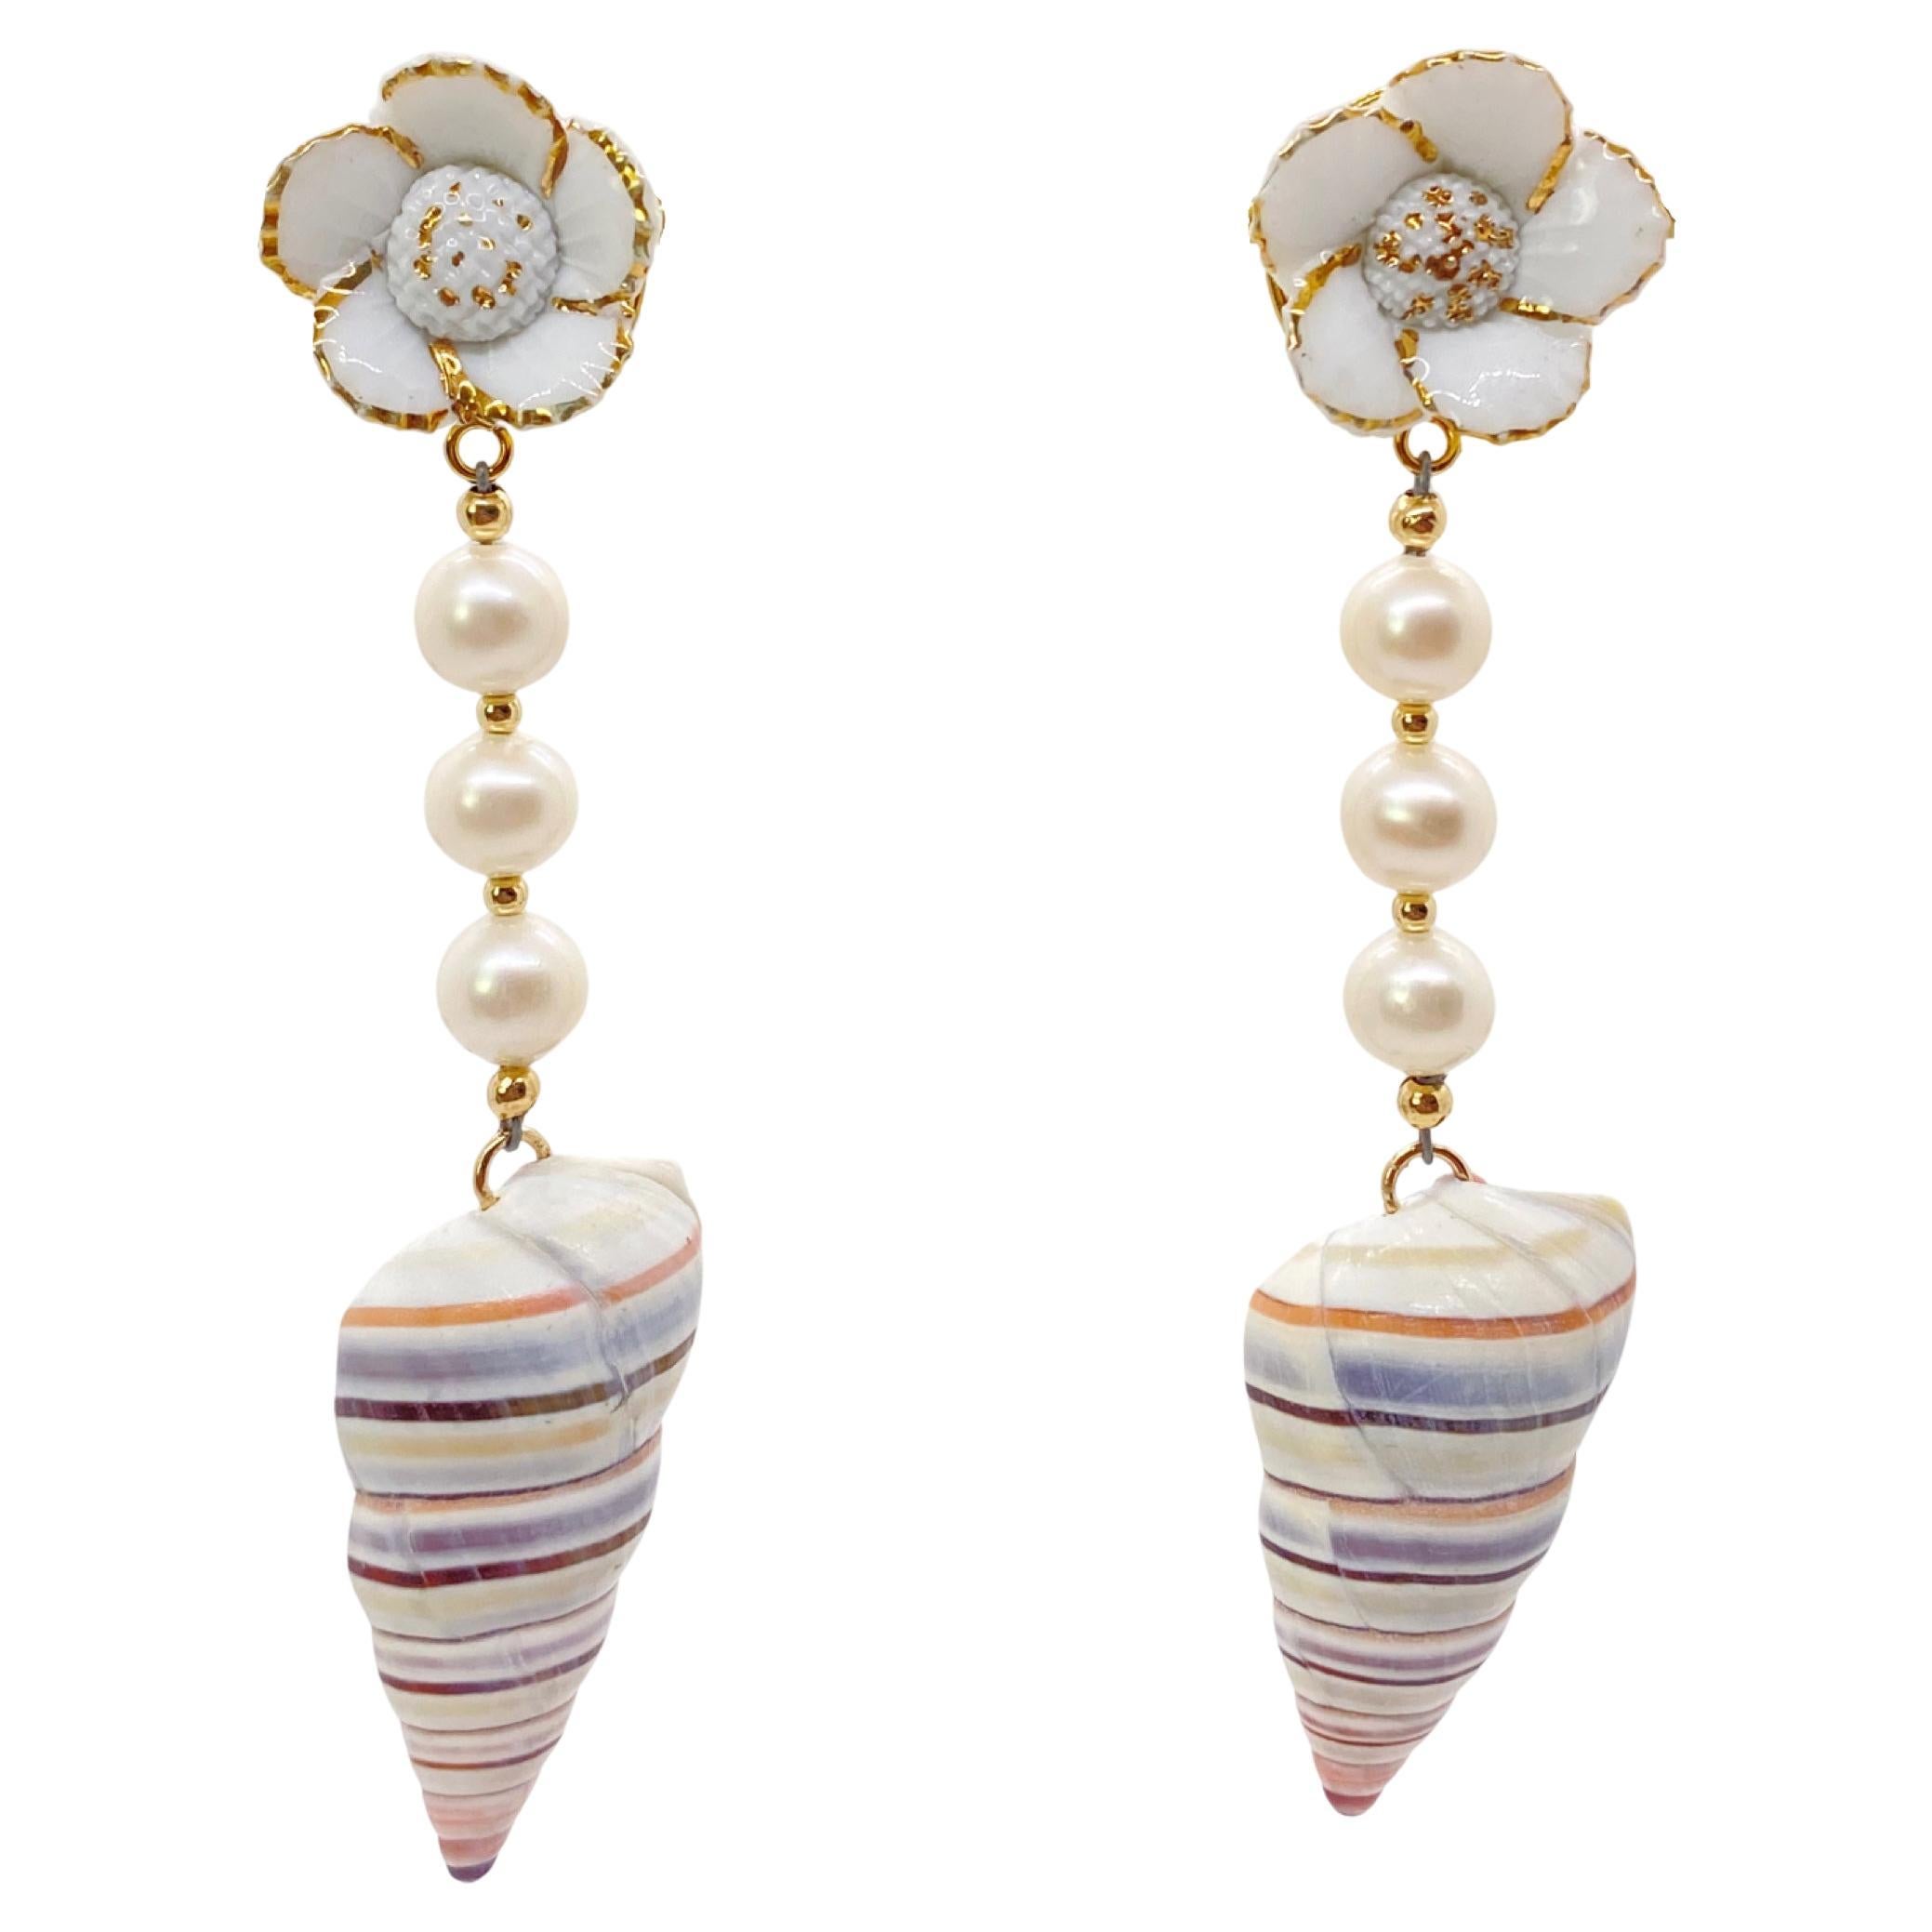 Shell and Pearl Dangling Earrings